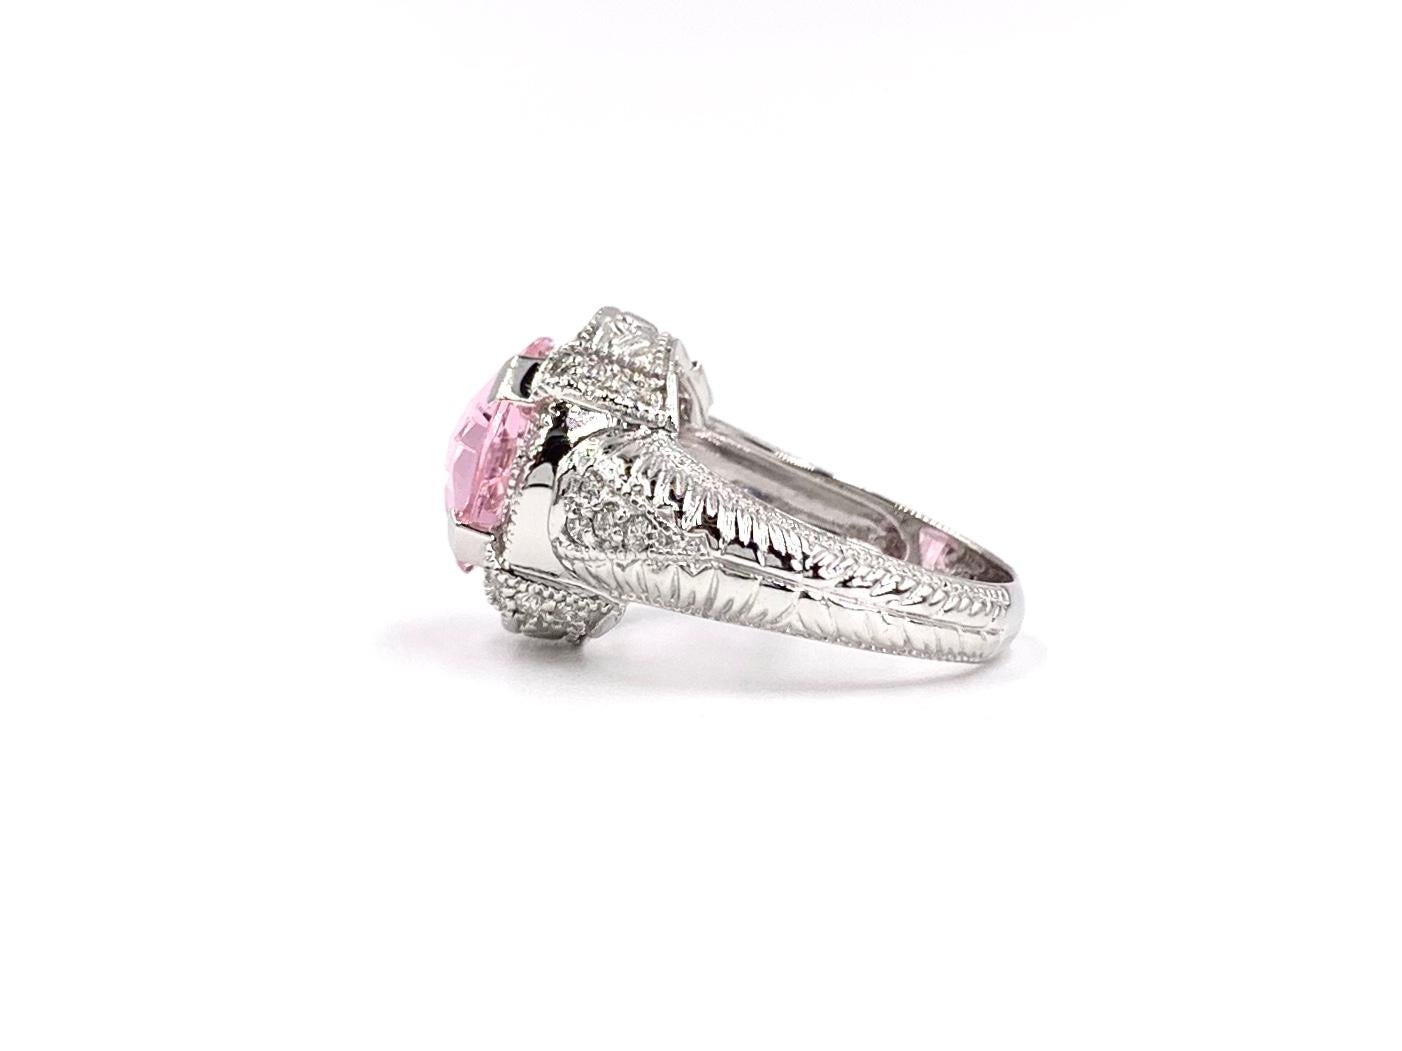 Beautiful and bright, this 14 karat white gold fashion ring features a checkerboard faceted cushion cut pink quartz and .50 carat of white round brilliant diamonds. Diamond quality is approximately G color, SI1 clarity. Diamond of ring measures 15mm